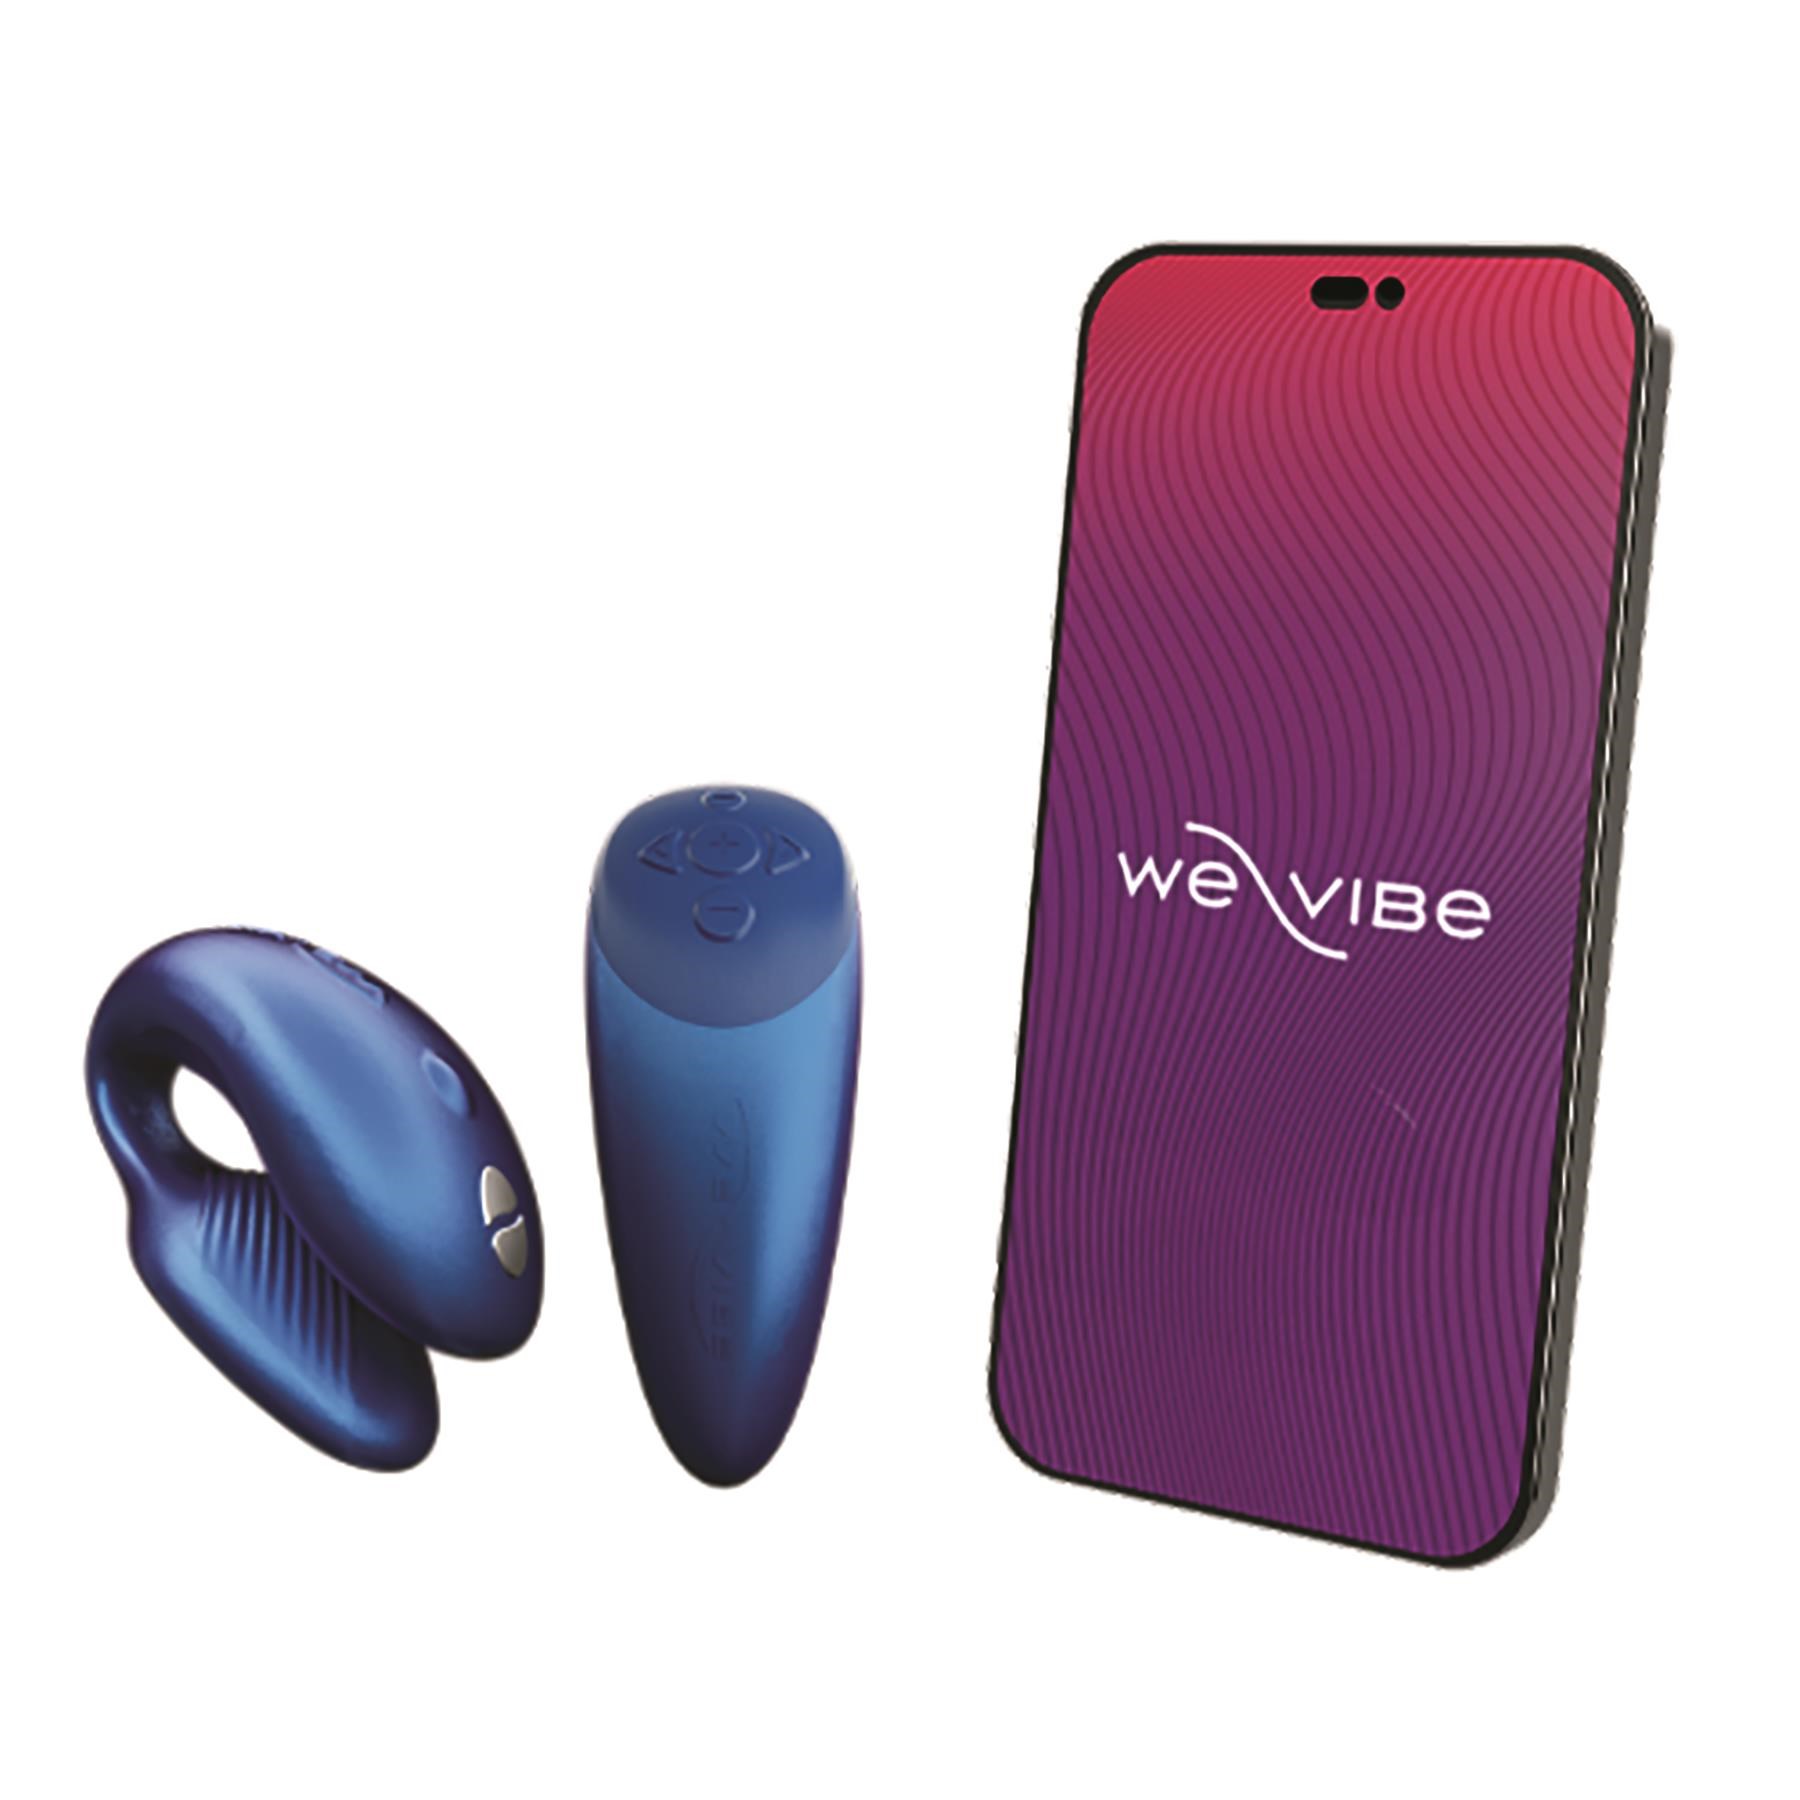 We-Vibe Chorus Couples Massager - Showing Phone with App